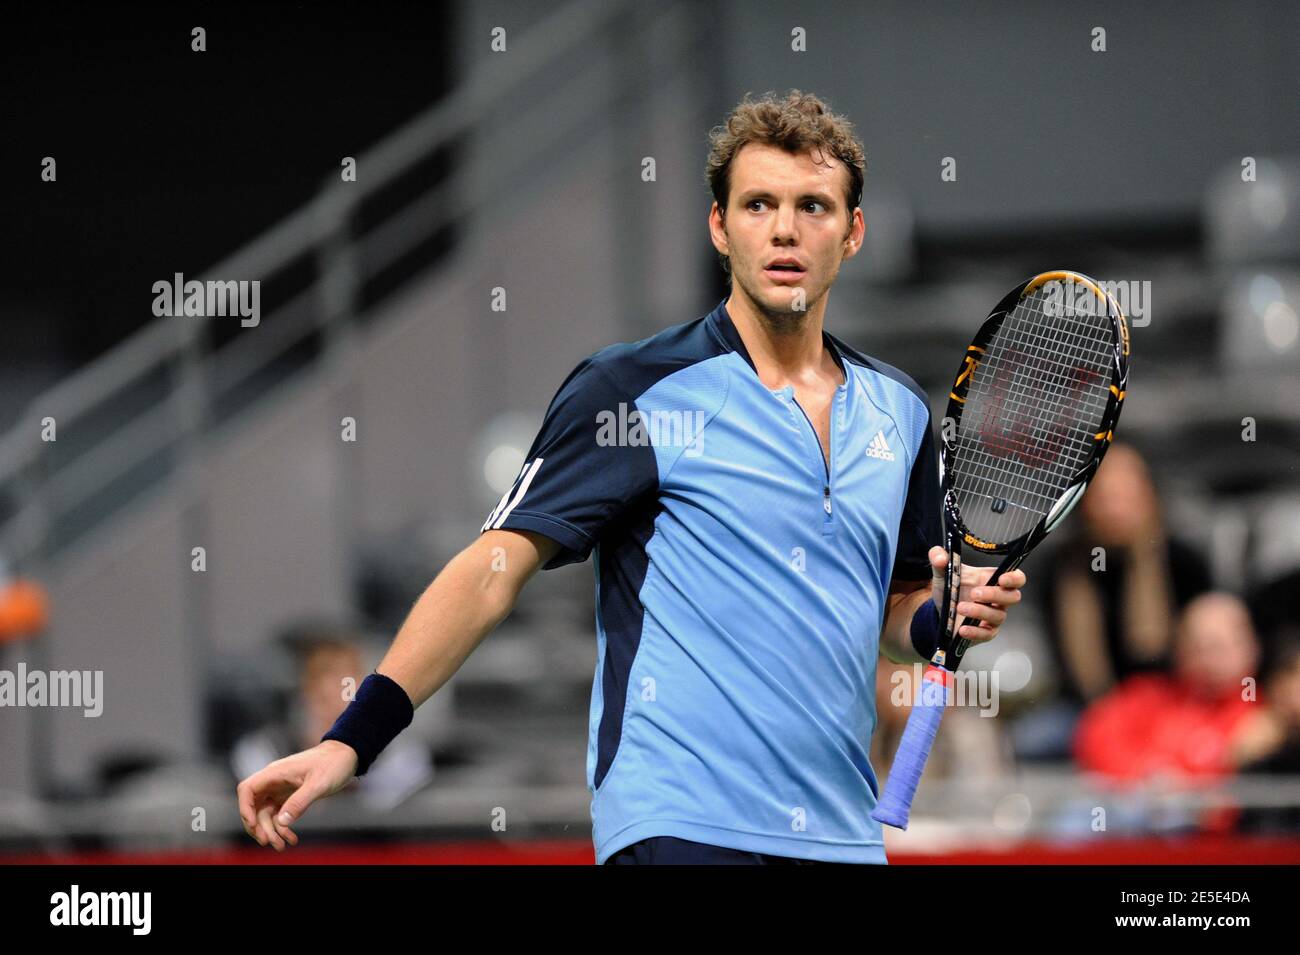 France's Paul-Henri Mathieu defeats, 6-4, 6-0, his comatriot Arnaud Clement  in their fist